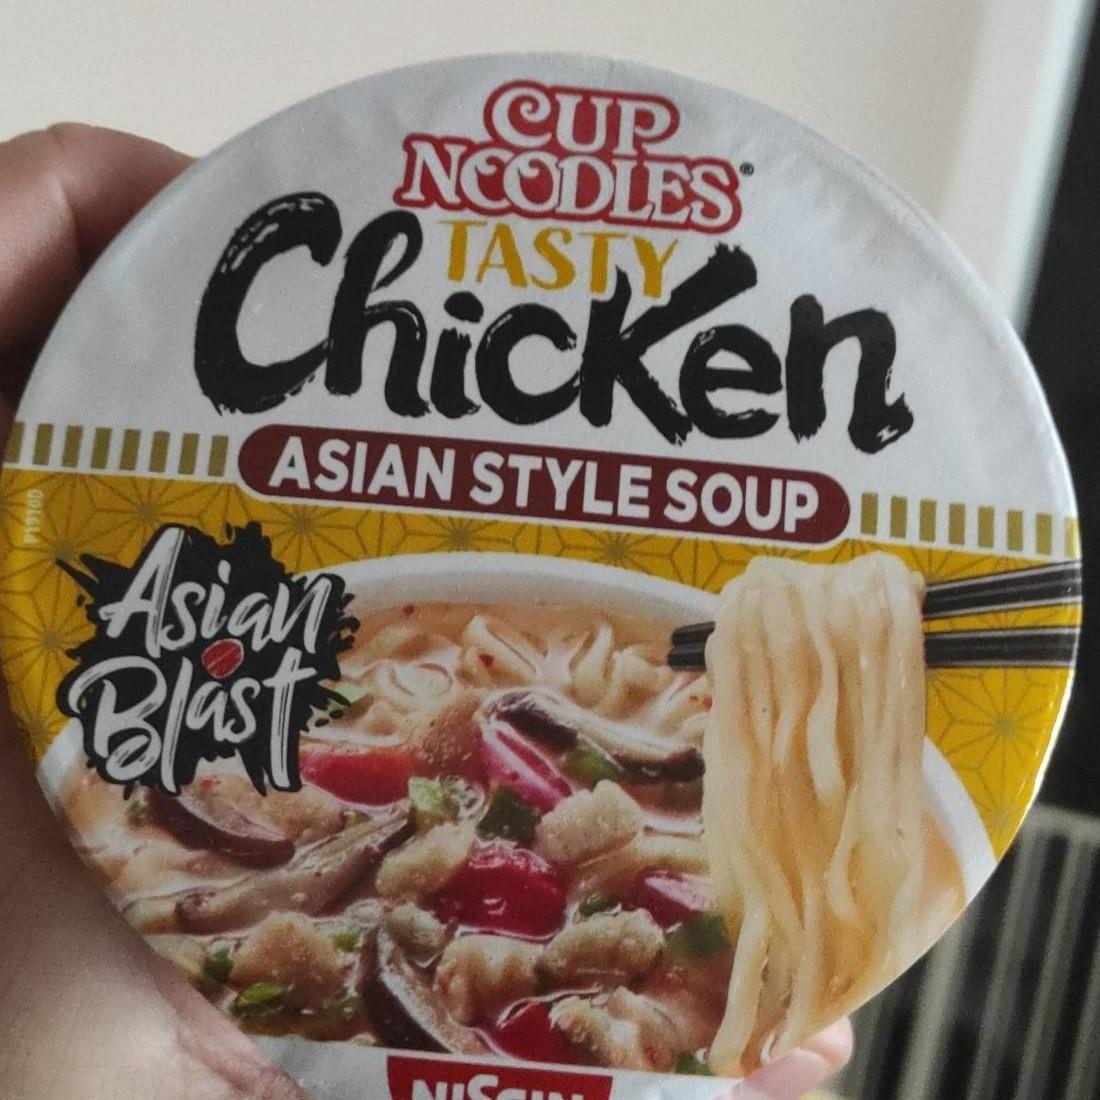 Fotografie - Cup noodles tasty Chicken Asian Style Soup Nissin